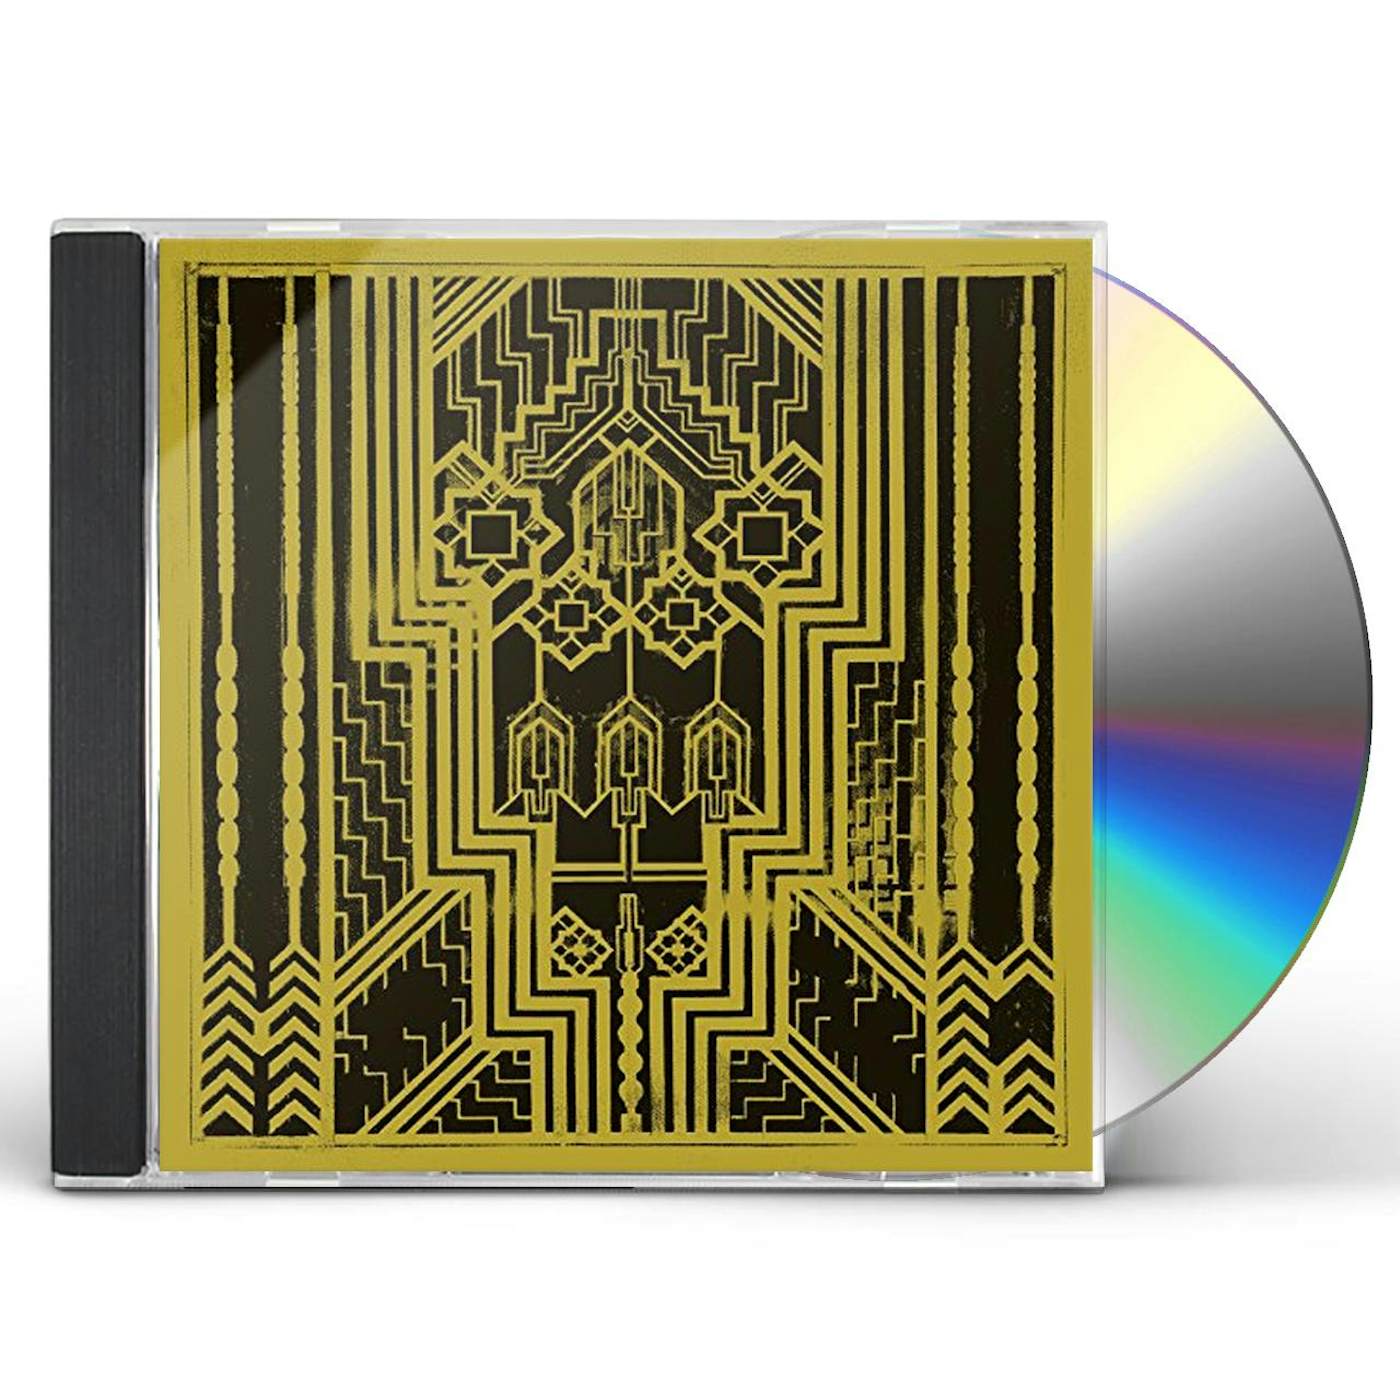 Hey Colossus IN BLACK & GOLD CD